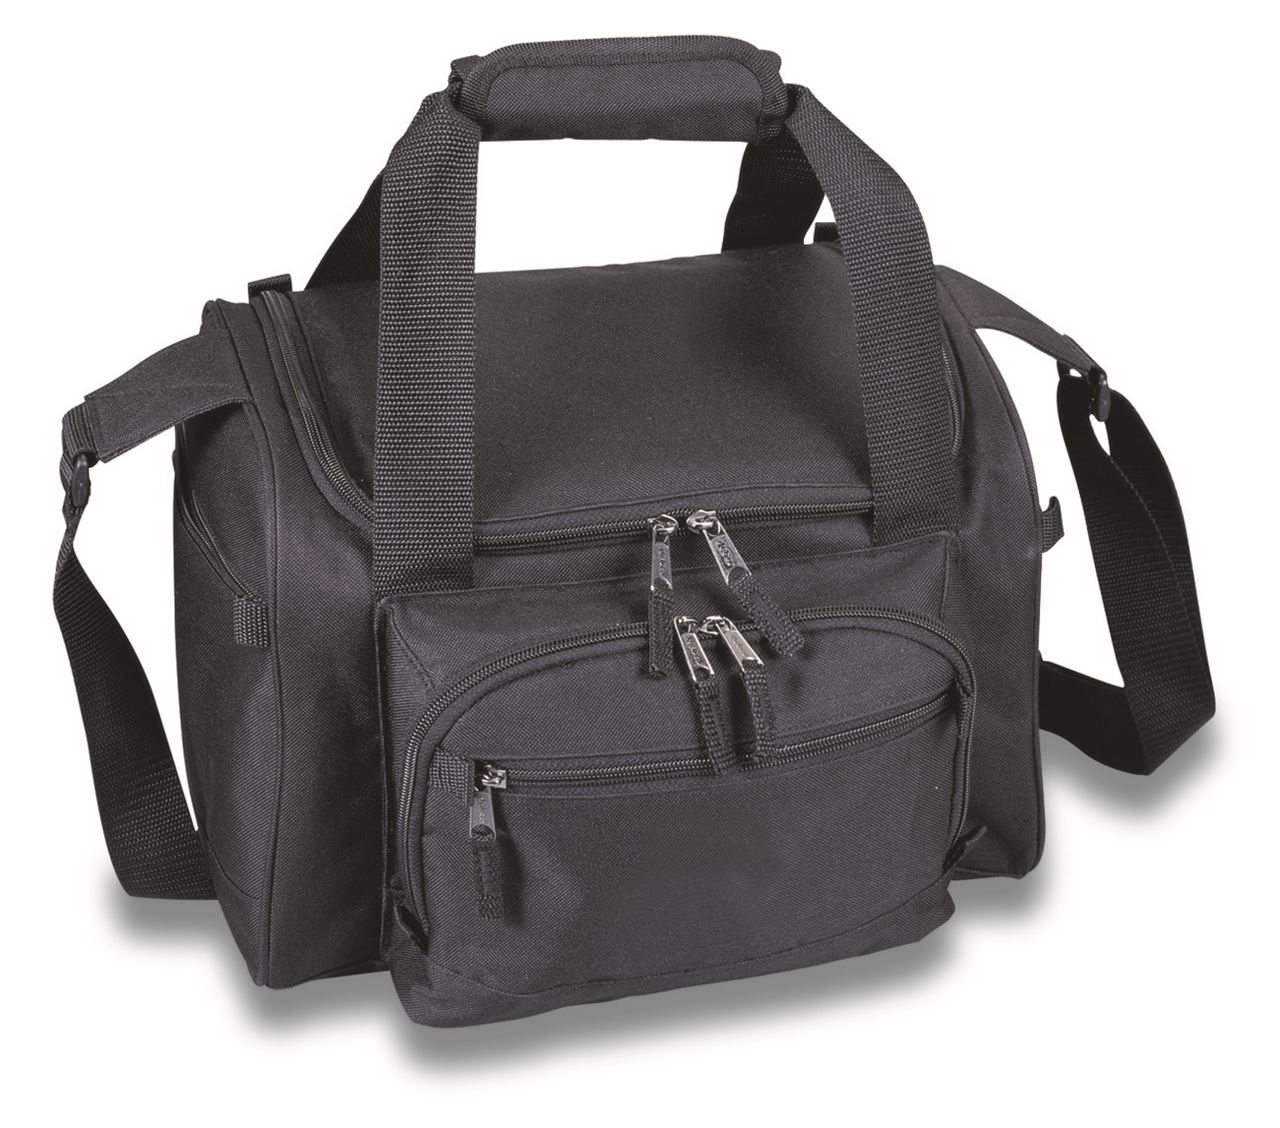 Picture of Cooler Bag (13.5" W x 9" H x 9" D)